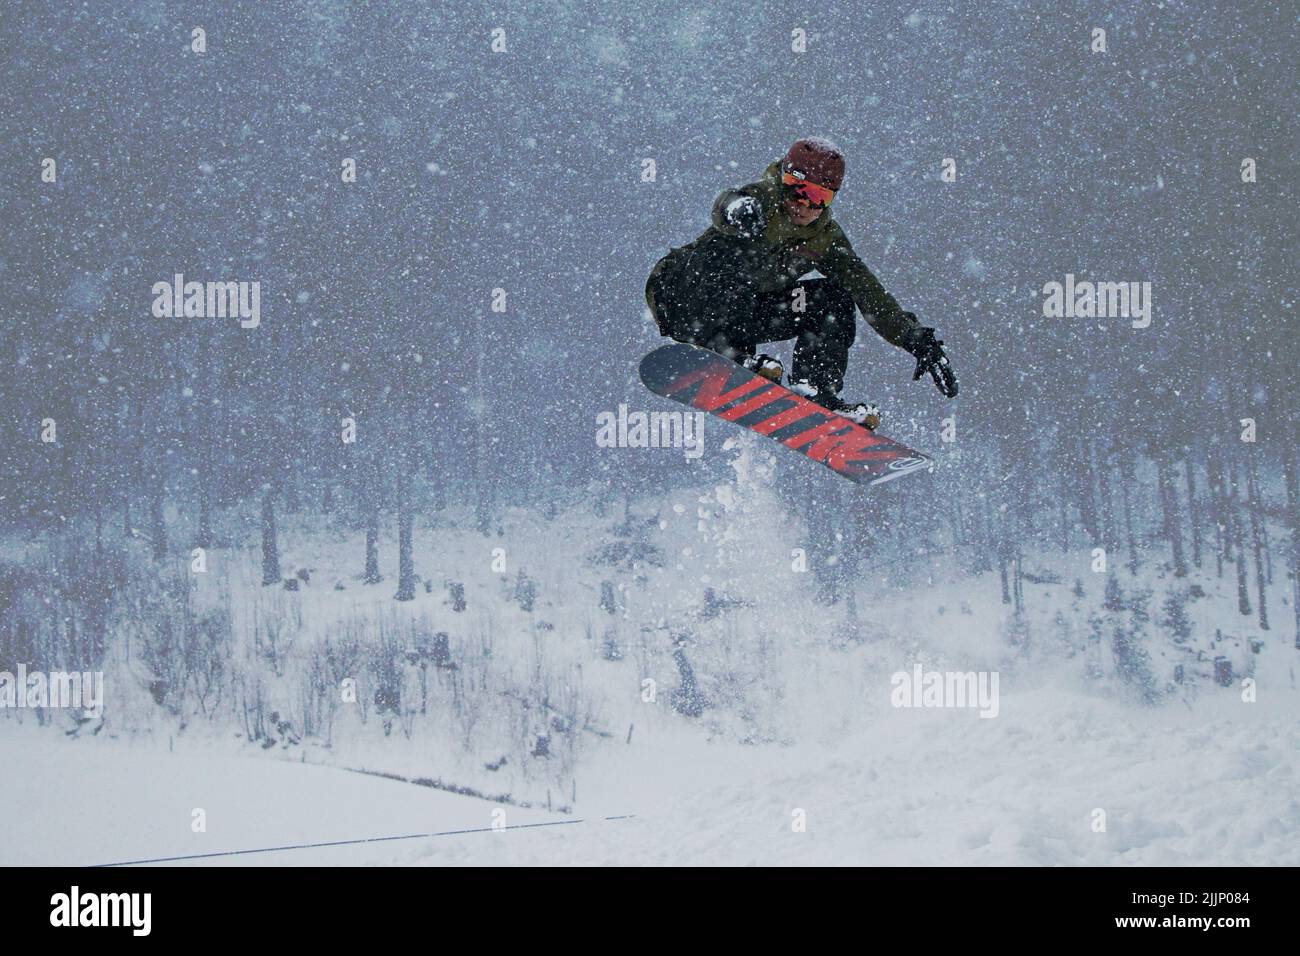 A Snowboarder making a Jump in a Snowstorm in the Swiss Mountains Stock Photo